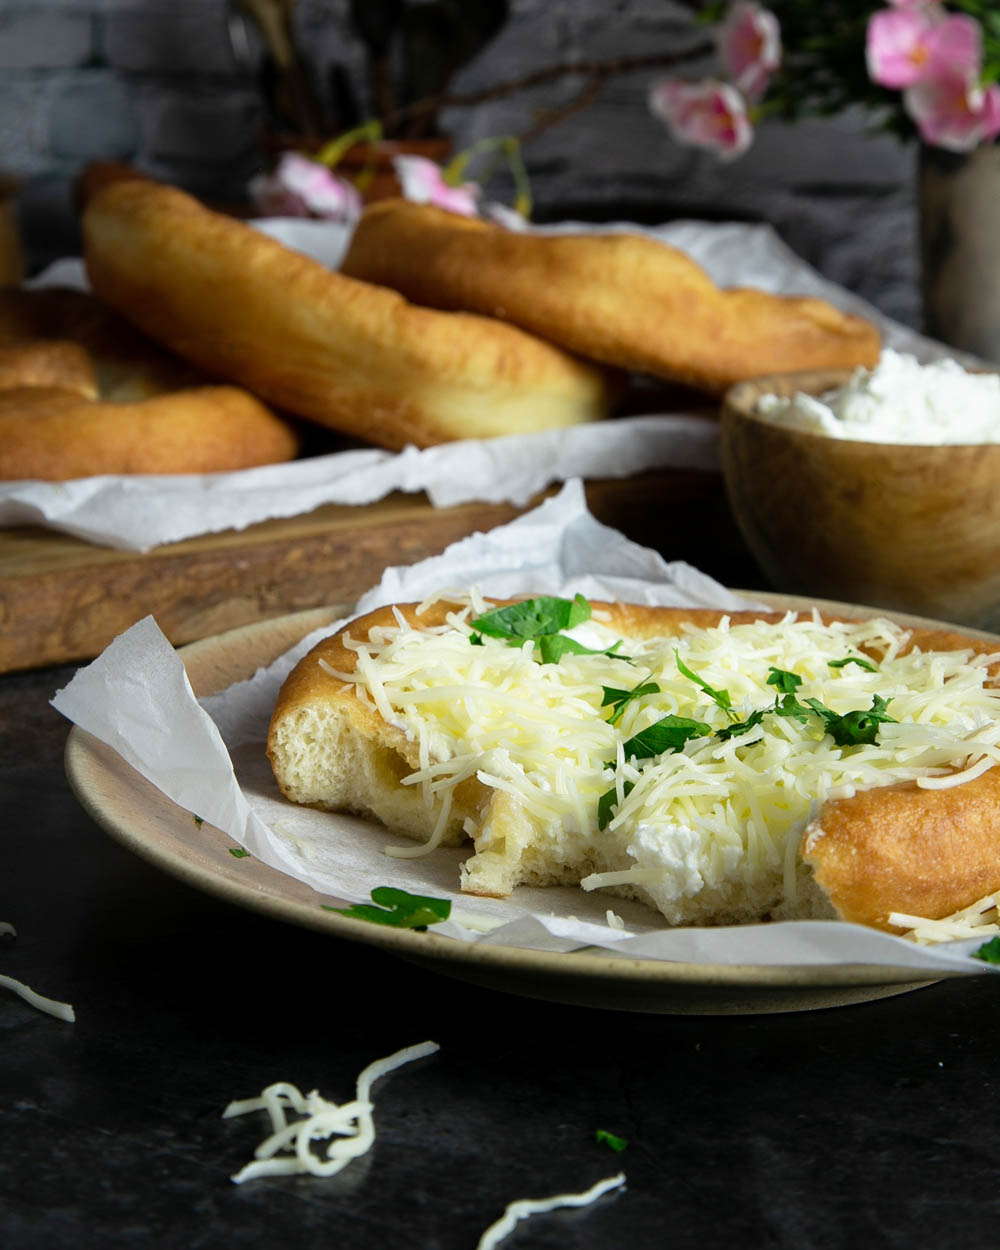 Half eaten Langos topped with the Hungarian traditional sour cream and cheese.